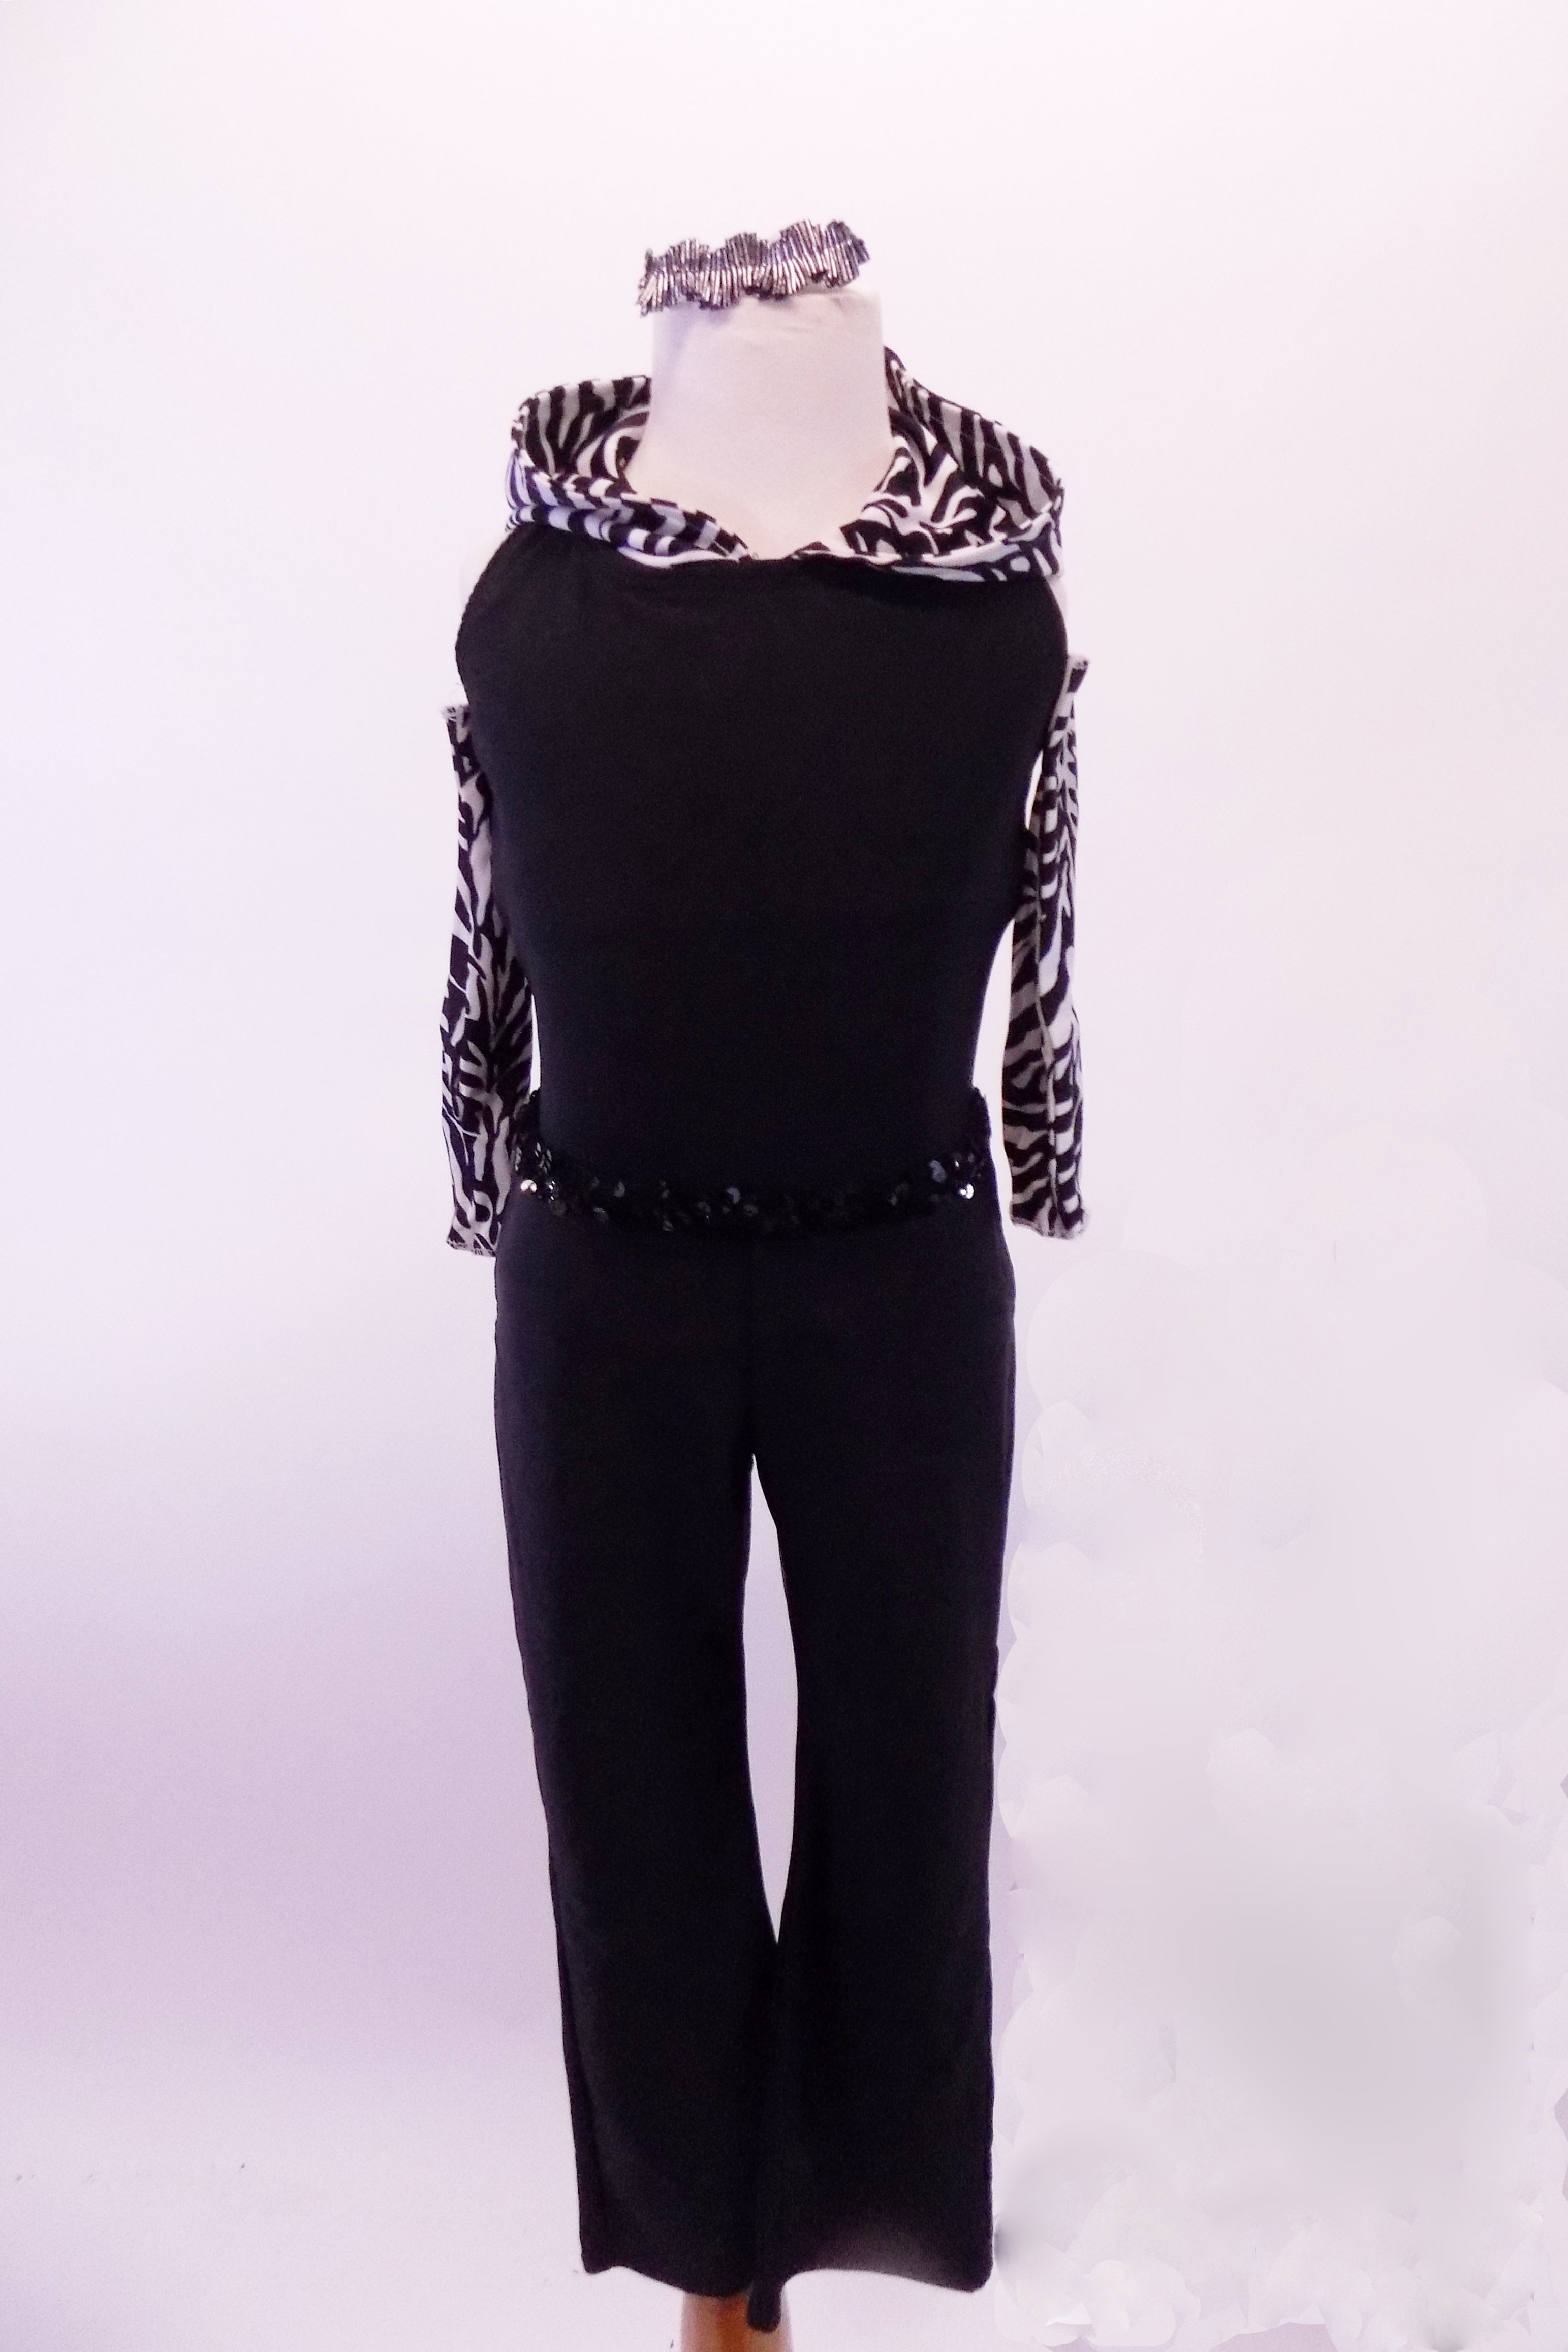 Zootopia inspired black halter collar top has zebra print collar and hood. The matching black pants have a sequined belt. Comes with zebra print long gauntlets. Front